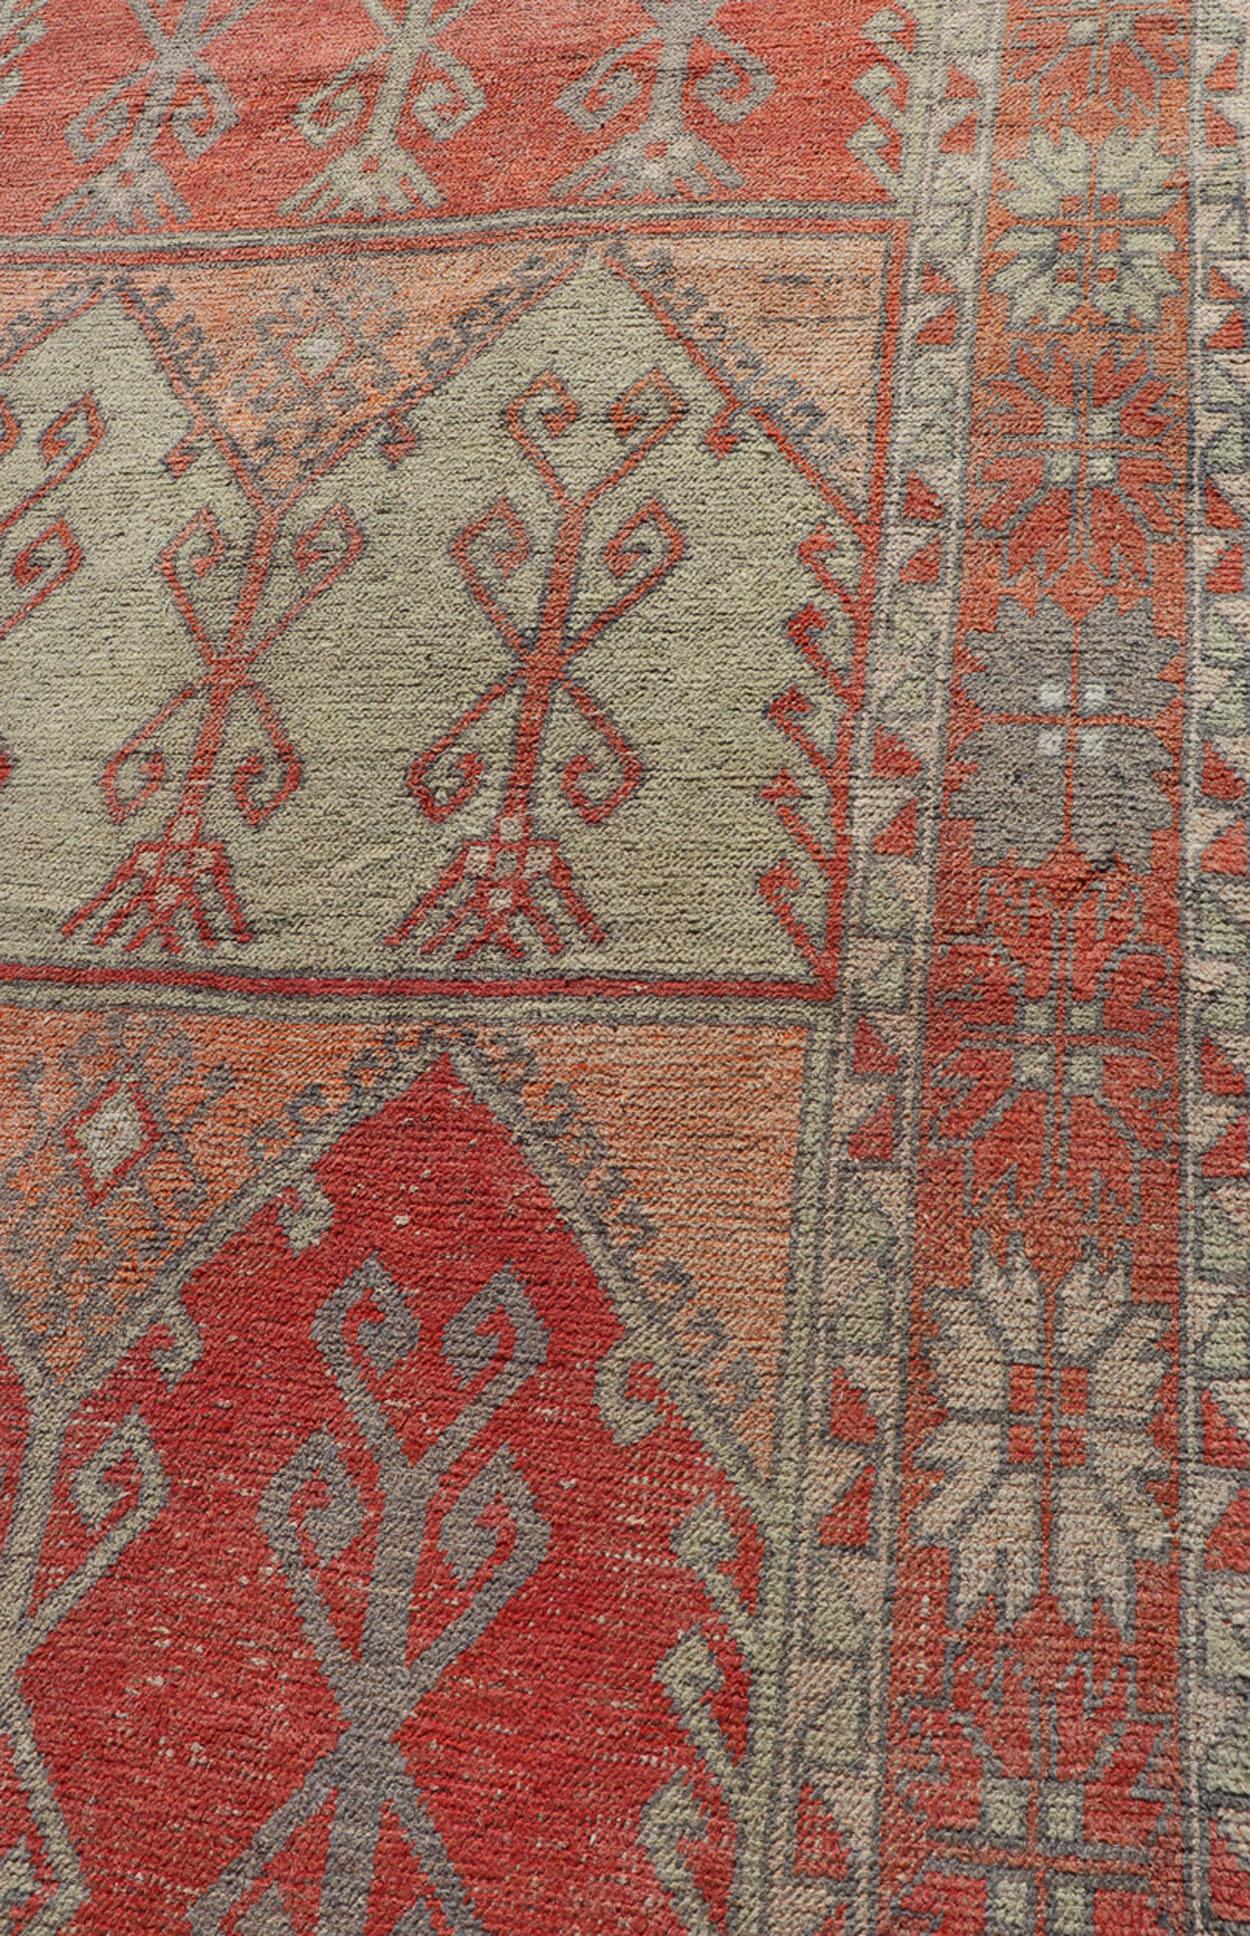 Gallery Rug, Vintage Turkish in Faded Red, Coral, Orange, Soft Pink and Green For Sale 2